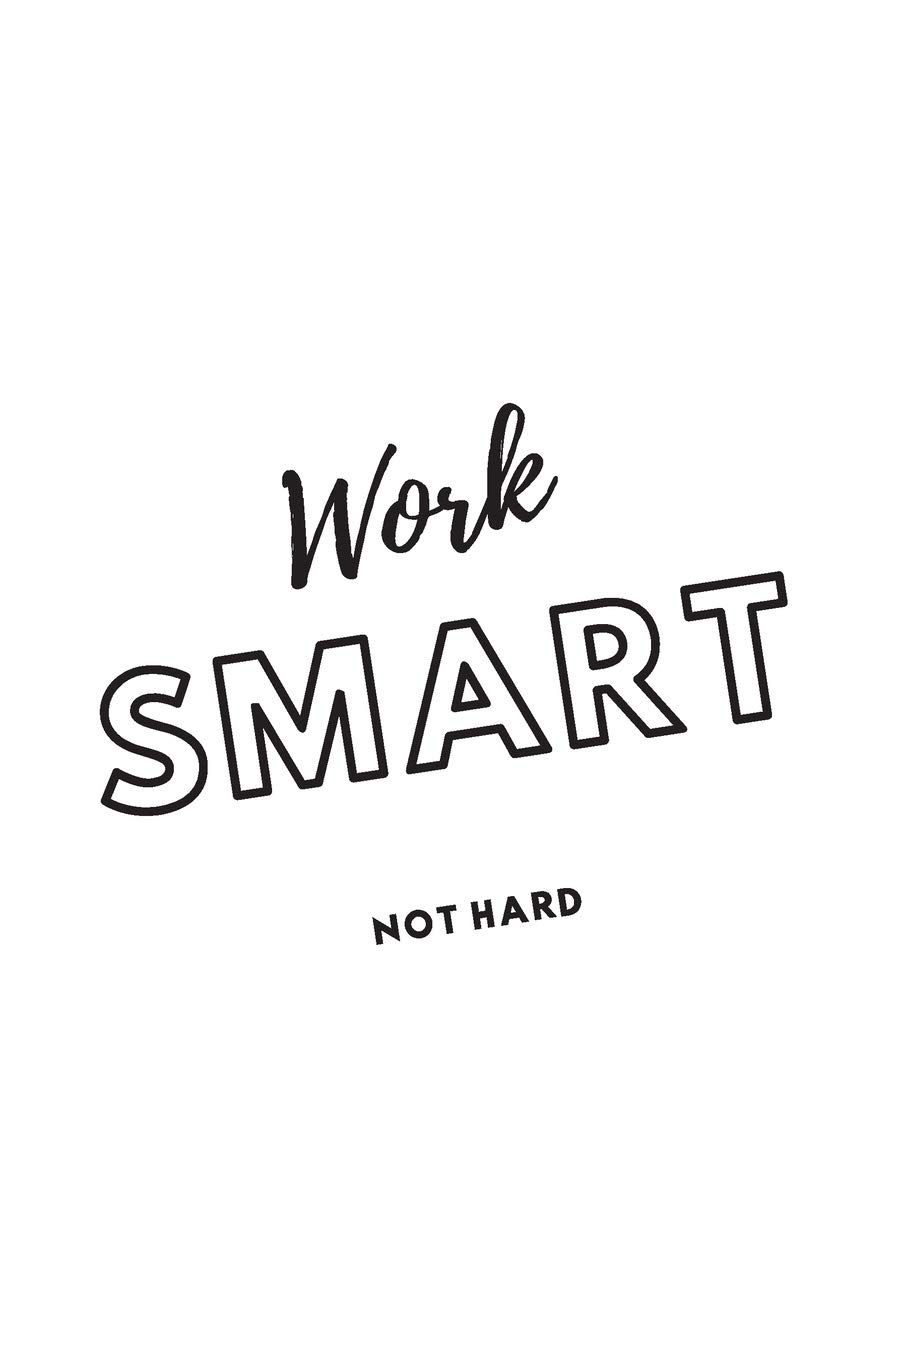 Work Smart Not Hard White Notebook: Motivational Notebook with Inspirational Quote on Paperback Glossy Cover. Half Lined Half Blank Journal Diary. 110 Ruled White Paper Pages, Size: 6x9 inch: Bella, La